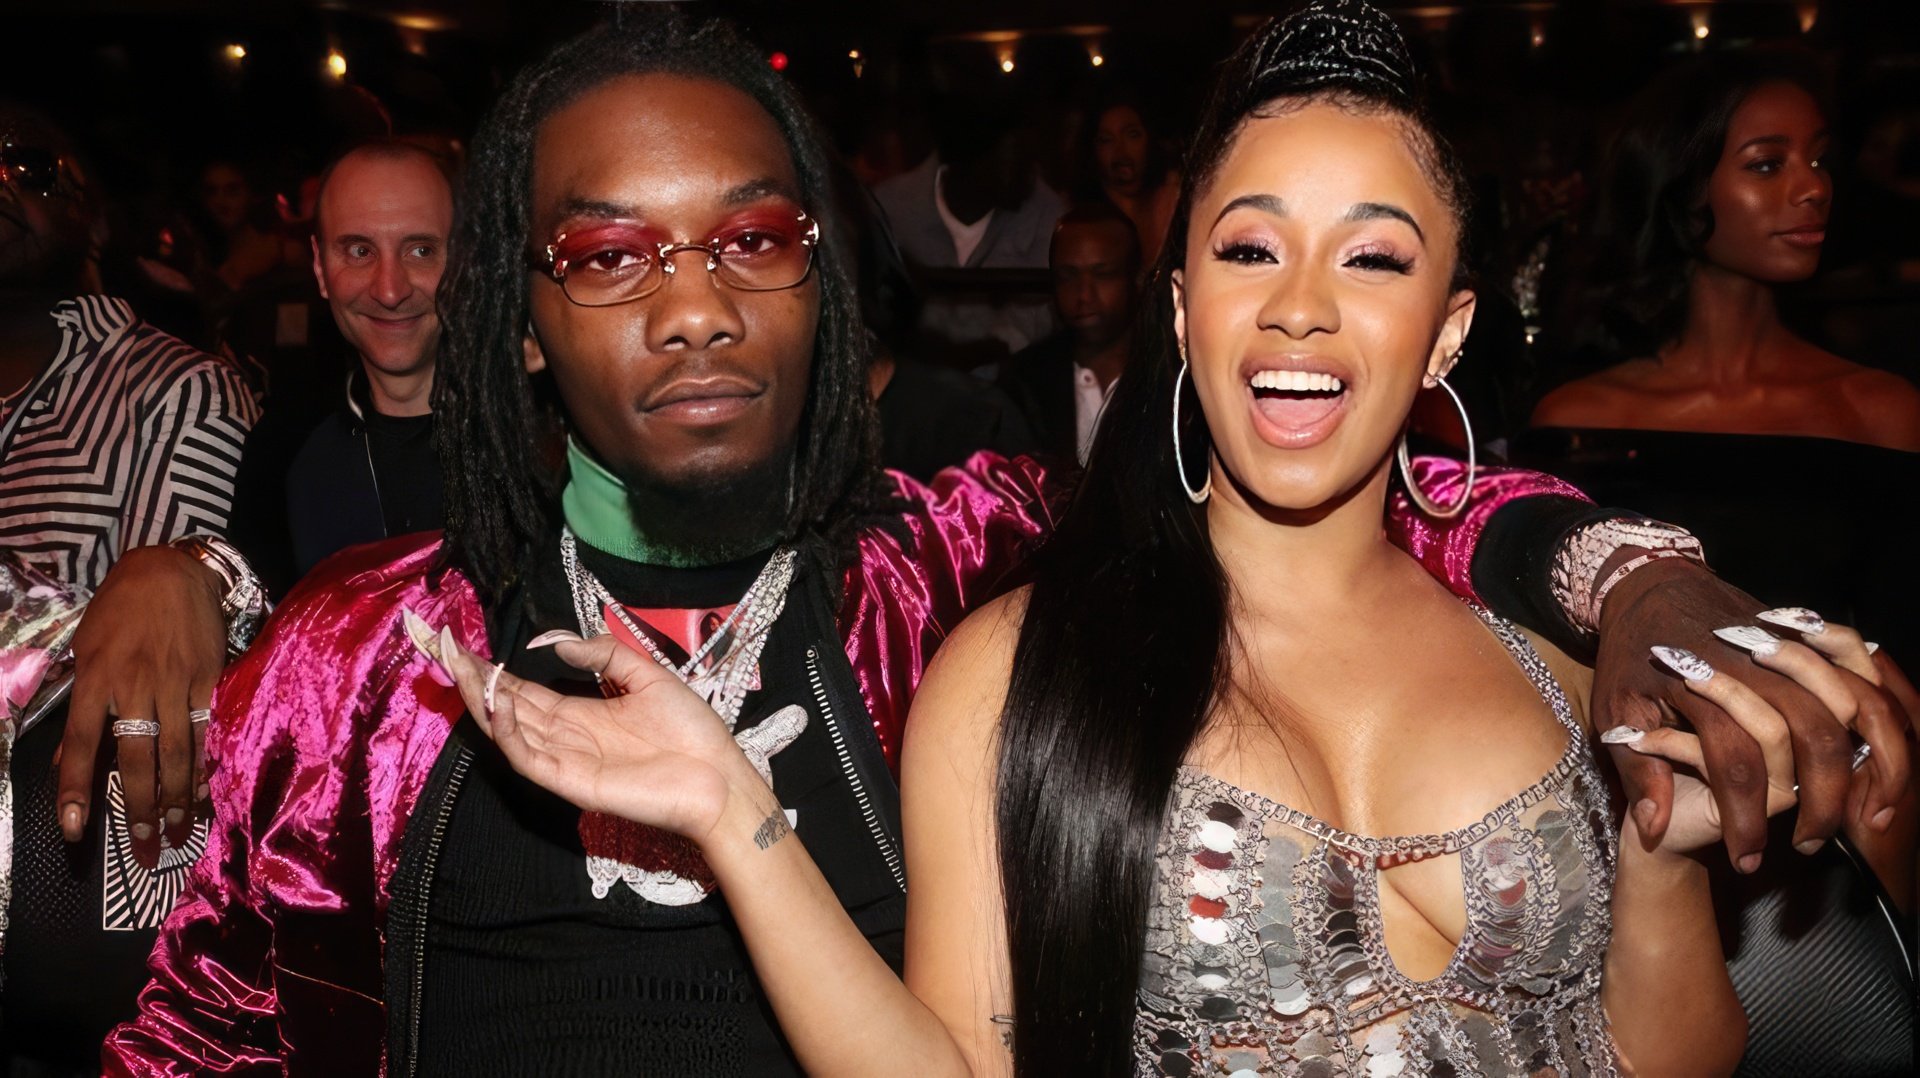 Cardi B and her husband Offset